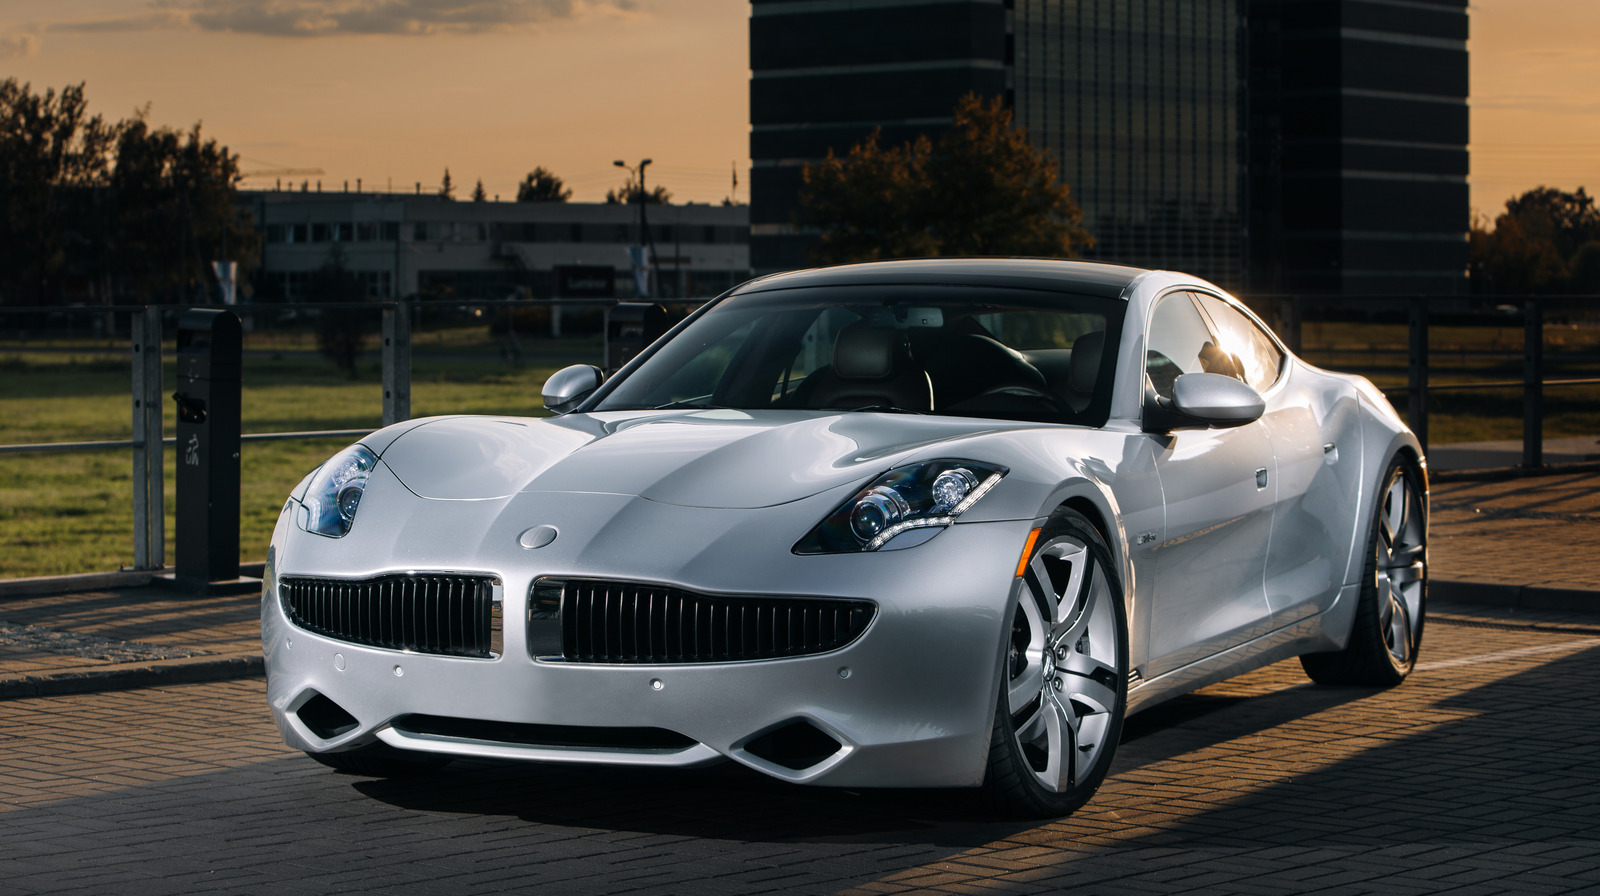 Here’s What You Need To Know Before Buying A Used Fisker Karma – SlashGear